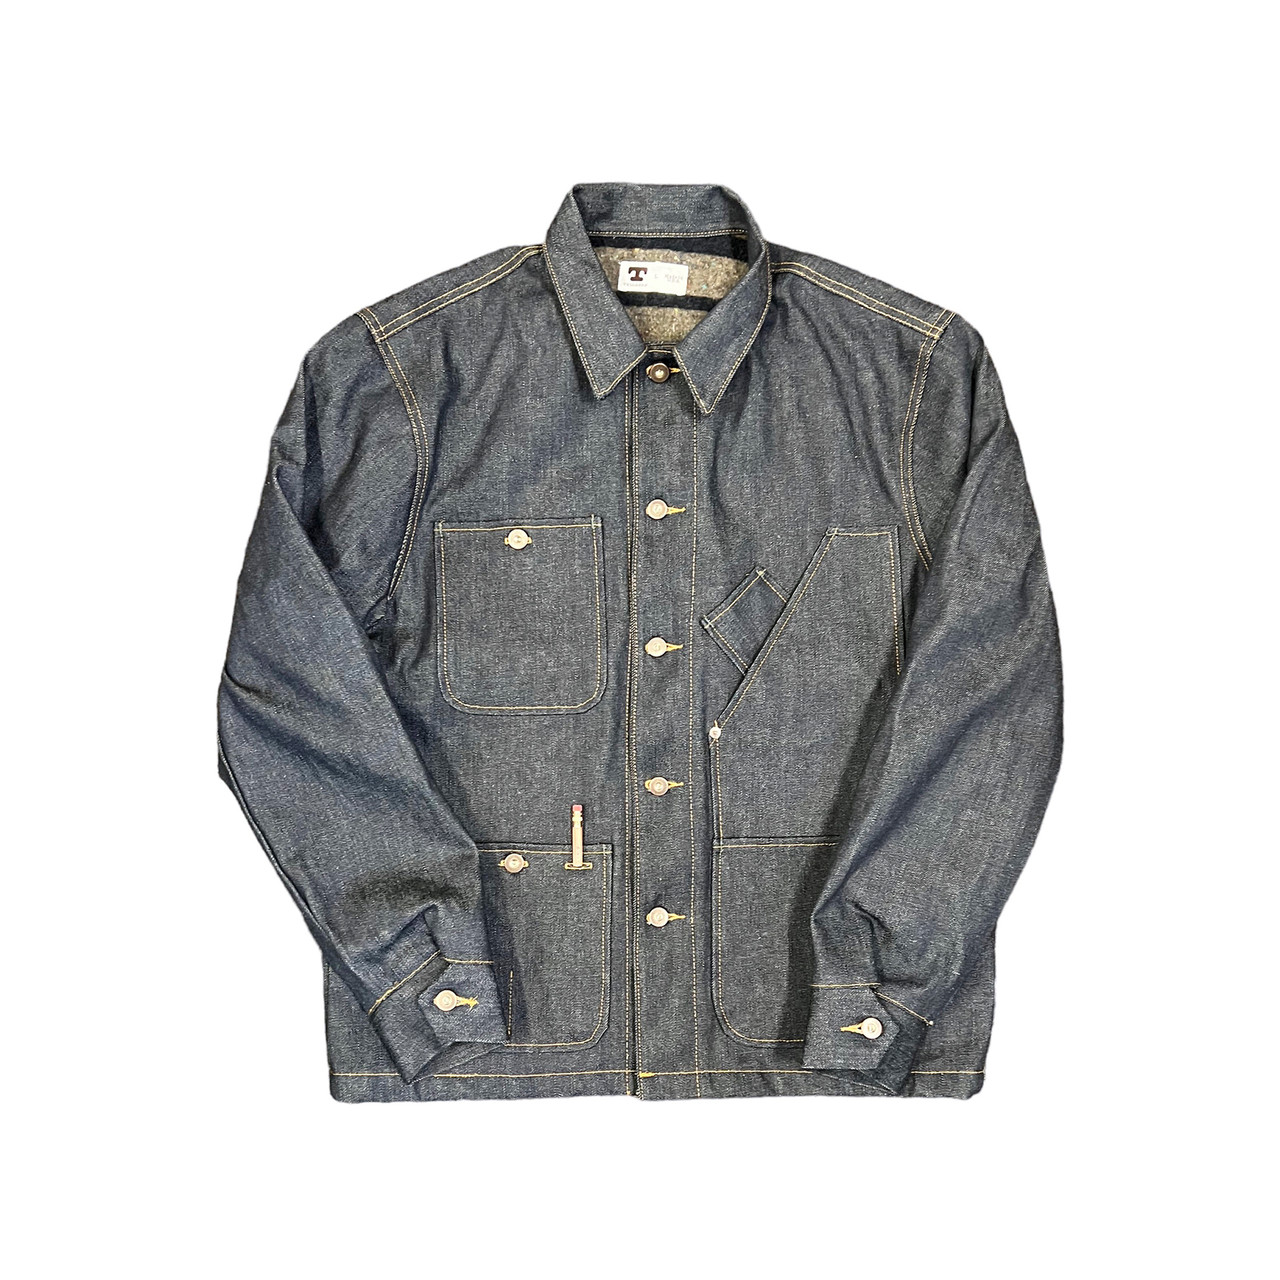 Blanket Lined 16.5 oz. Coverall Jacket